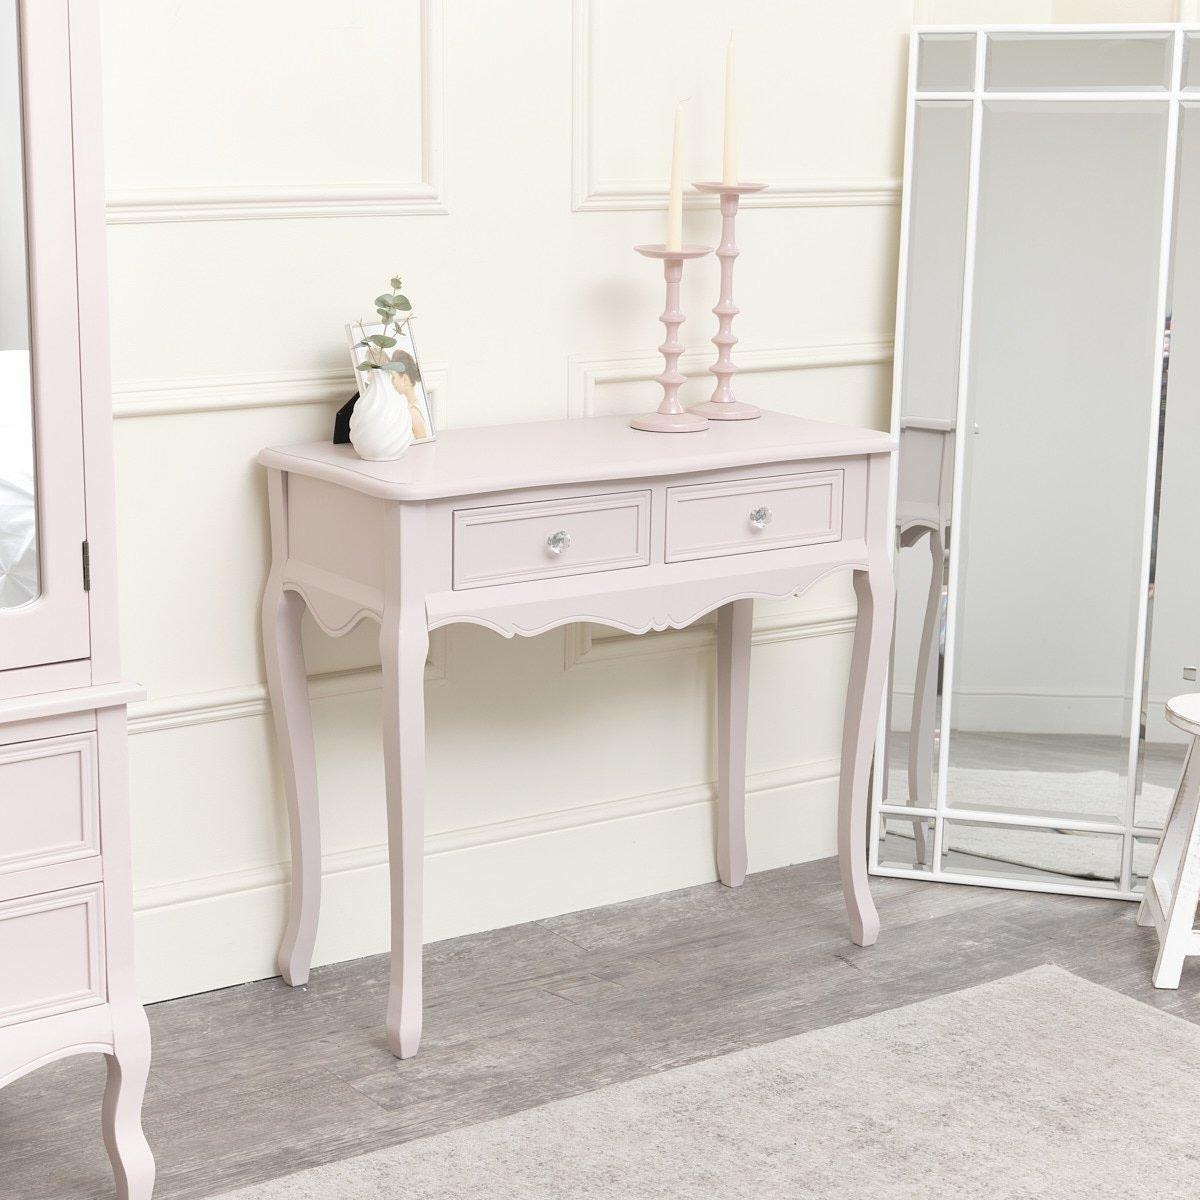 Pink Console / Dressing Table - Victoria Pink Range - image 1